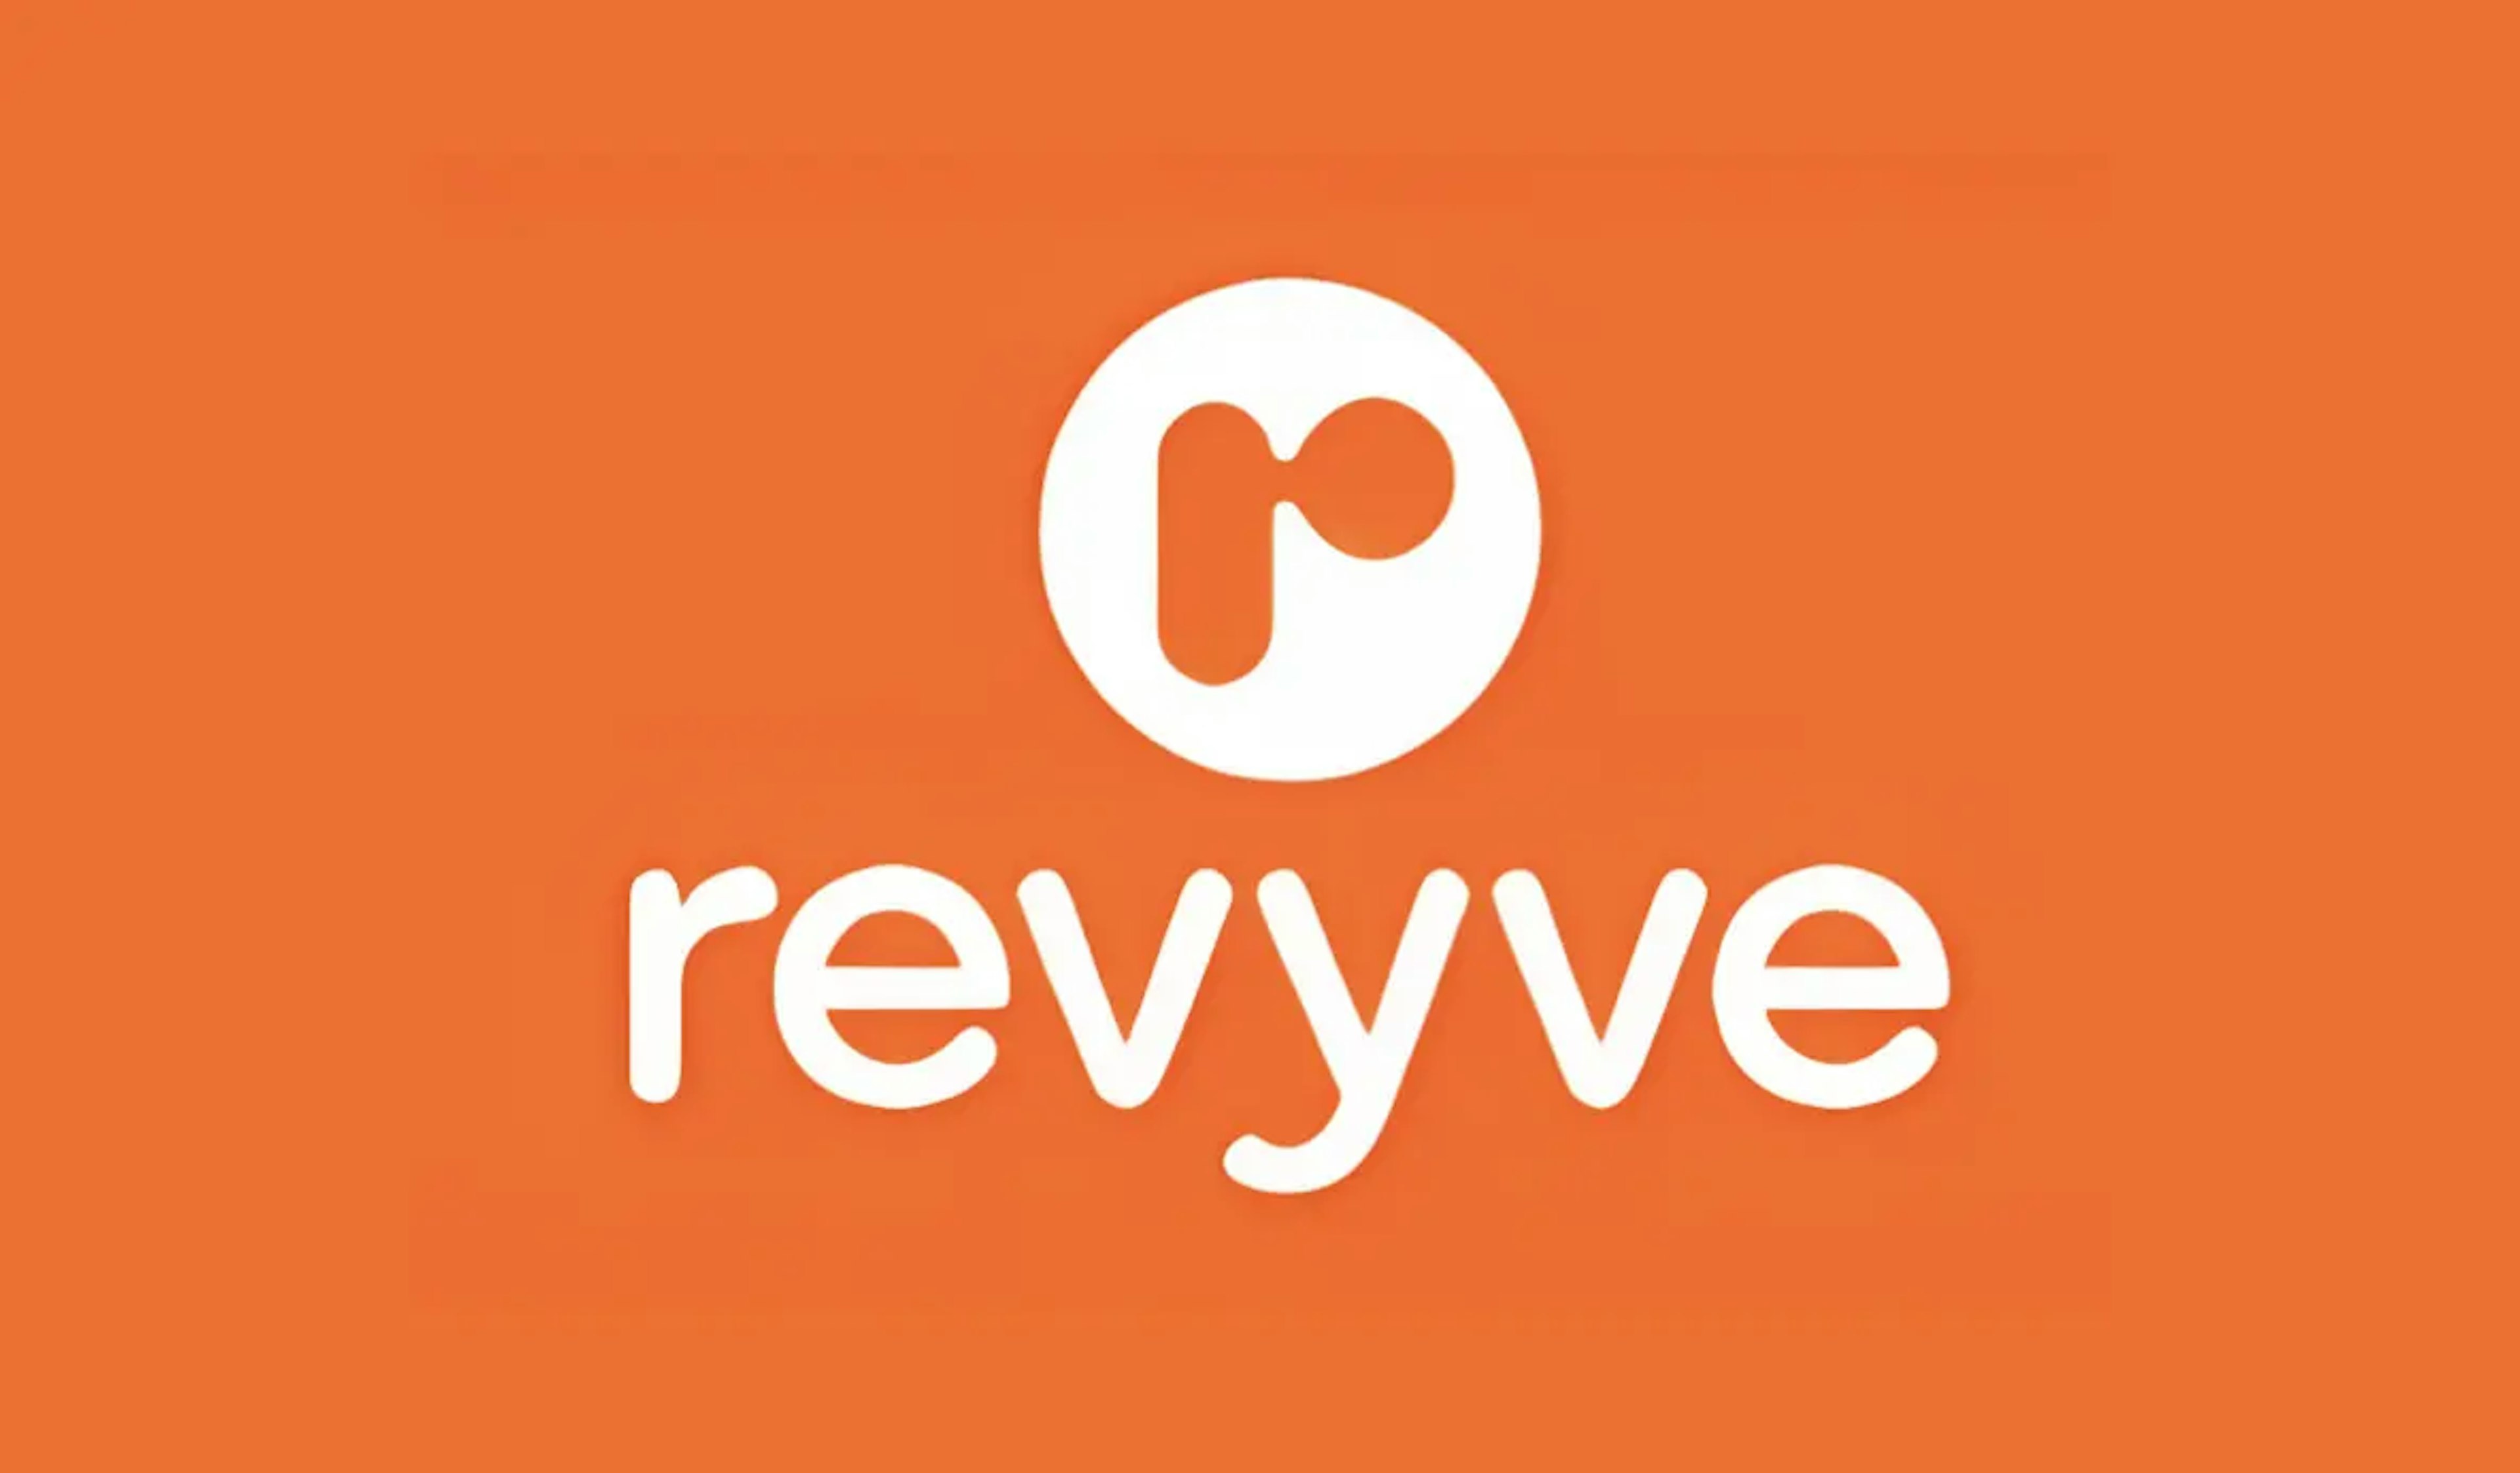 Revyve selects Opvia for electronic batch record (EBR) system in alternative protein production 